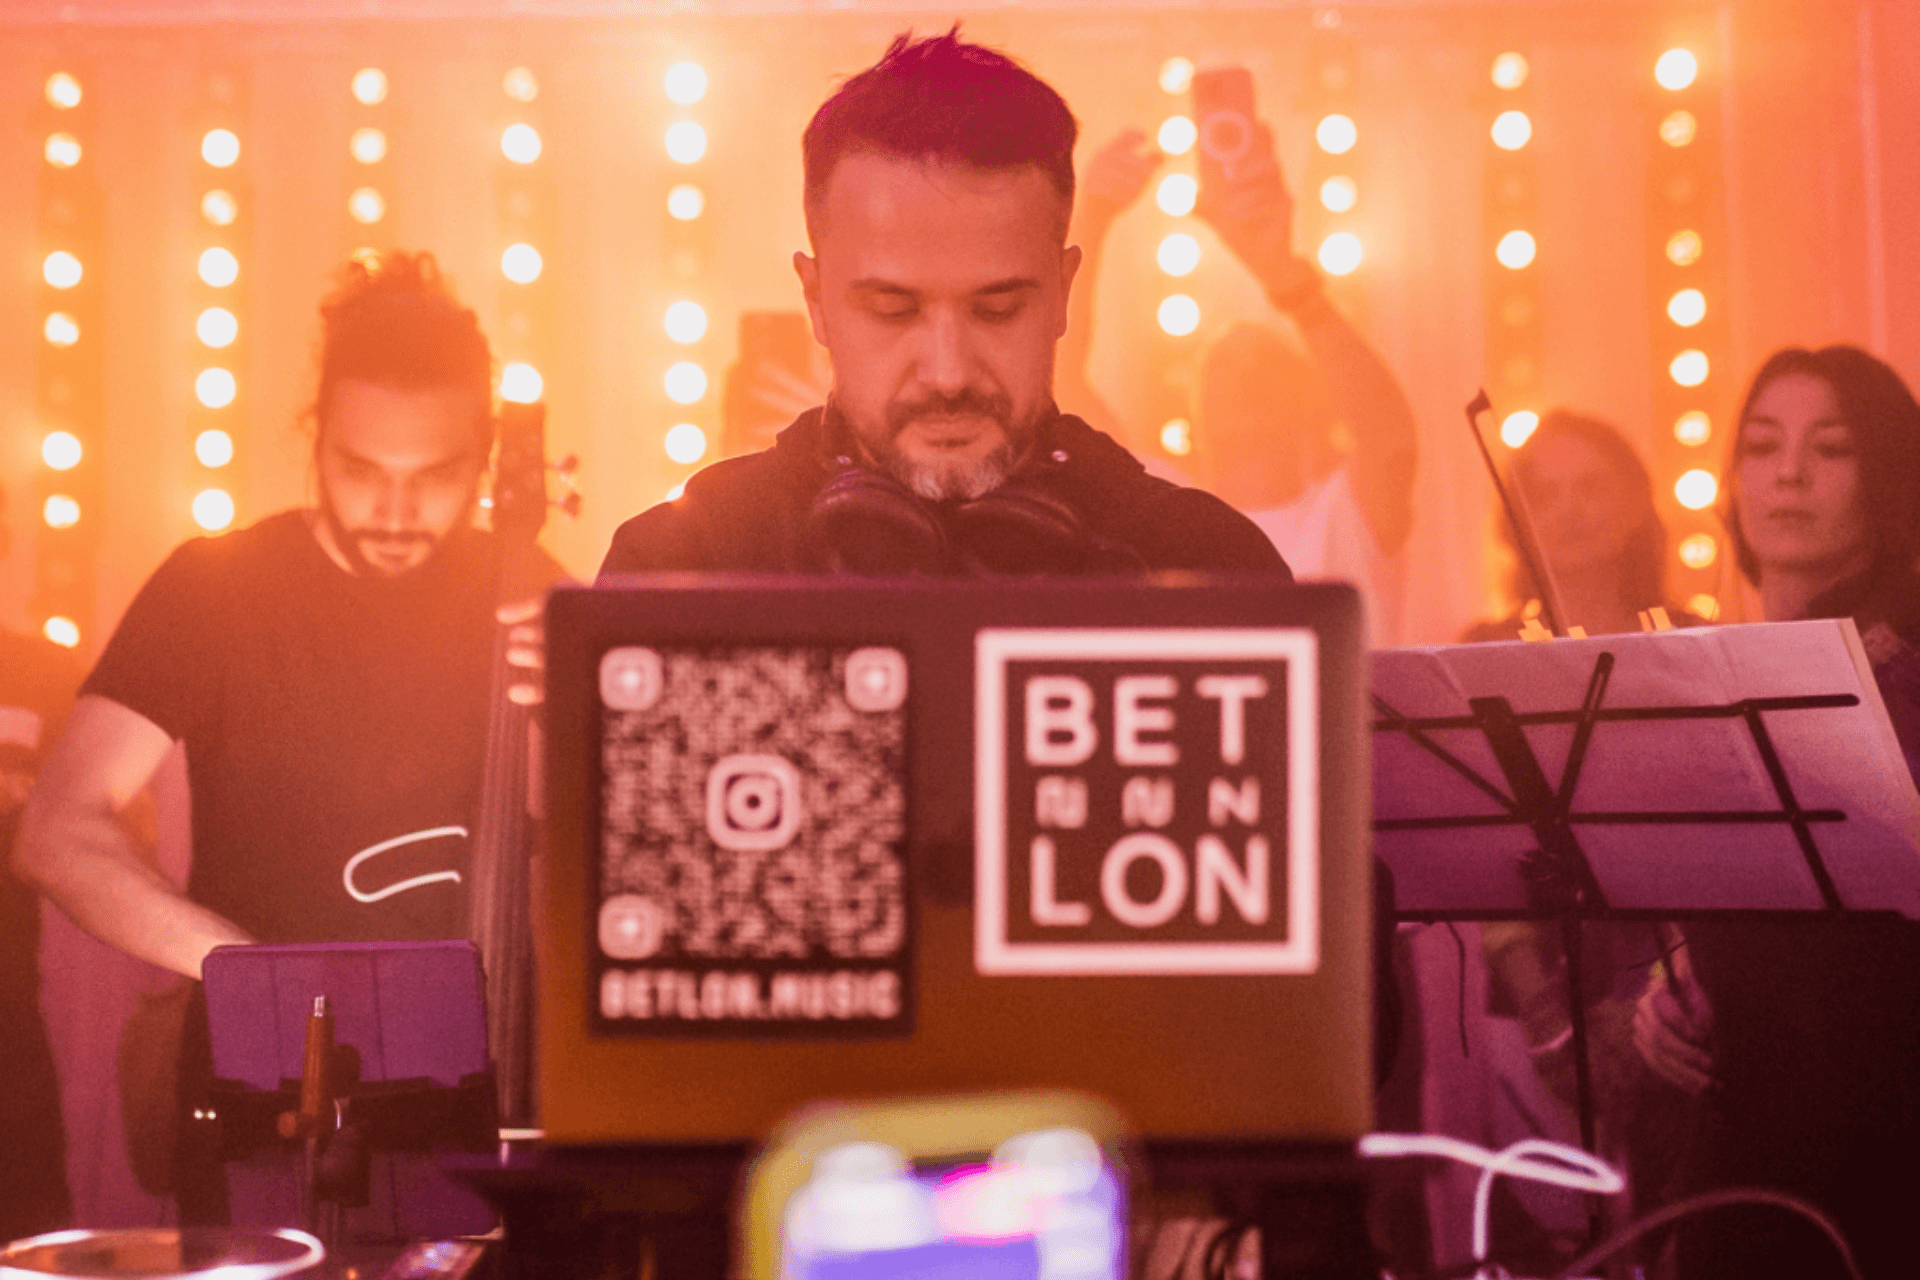 Welcome Bet Lon LIVE + orchestra for Management and Worldwide DJ bookings!